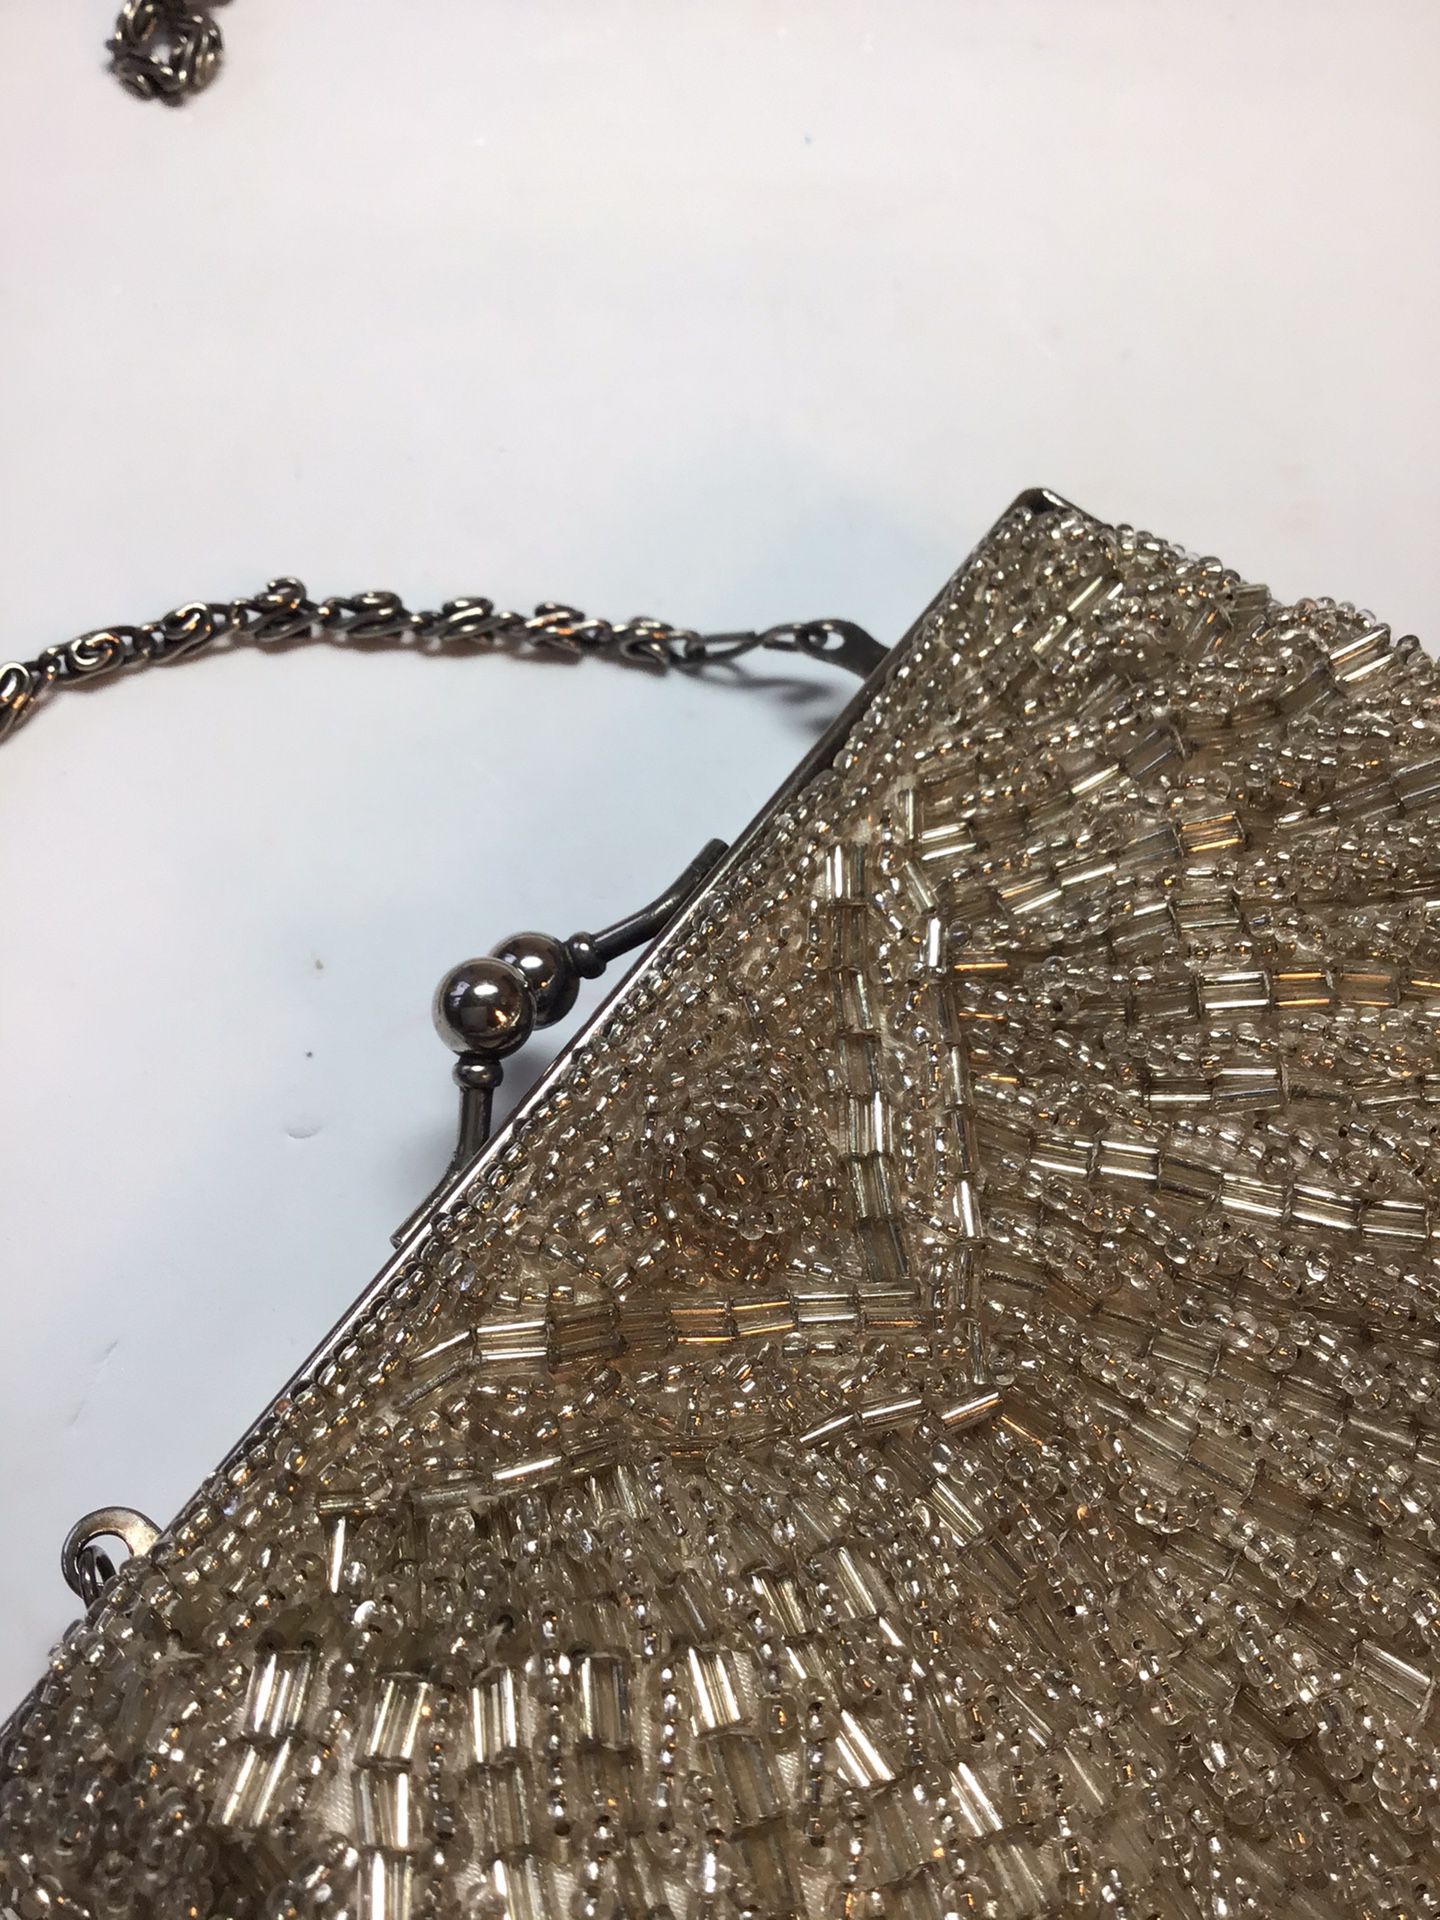 1950s La Regale Gold Clam Shell Beaded Purse for Sale in Rowland Heights,  CA - OfferUp